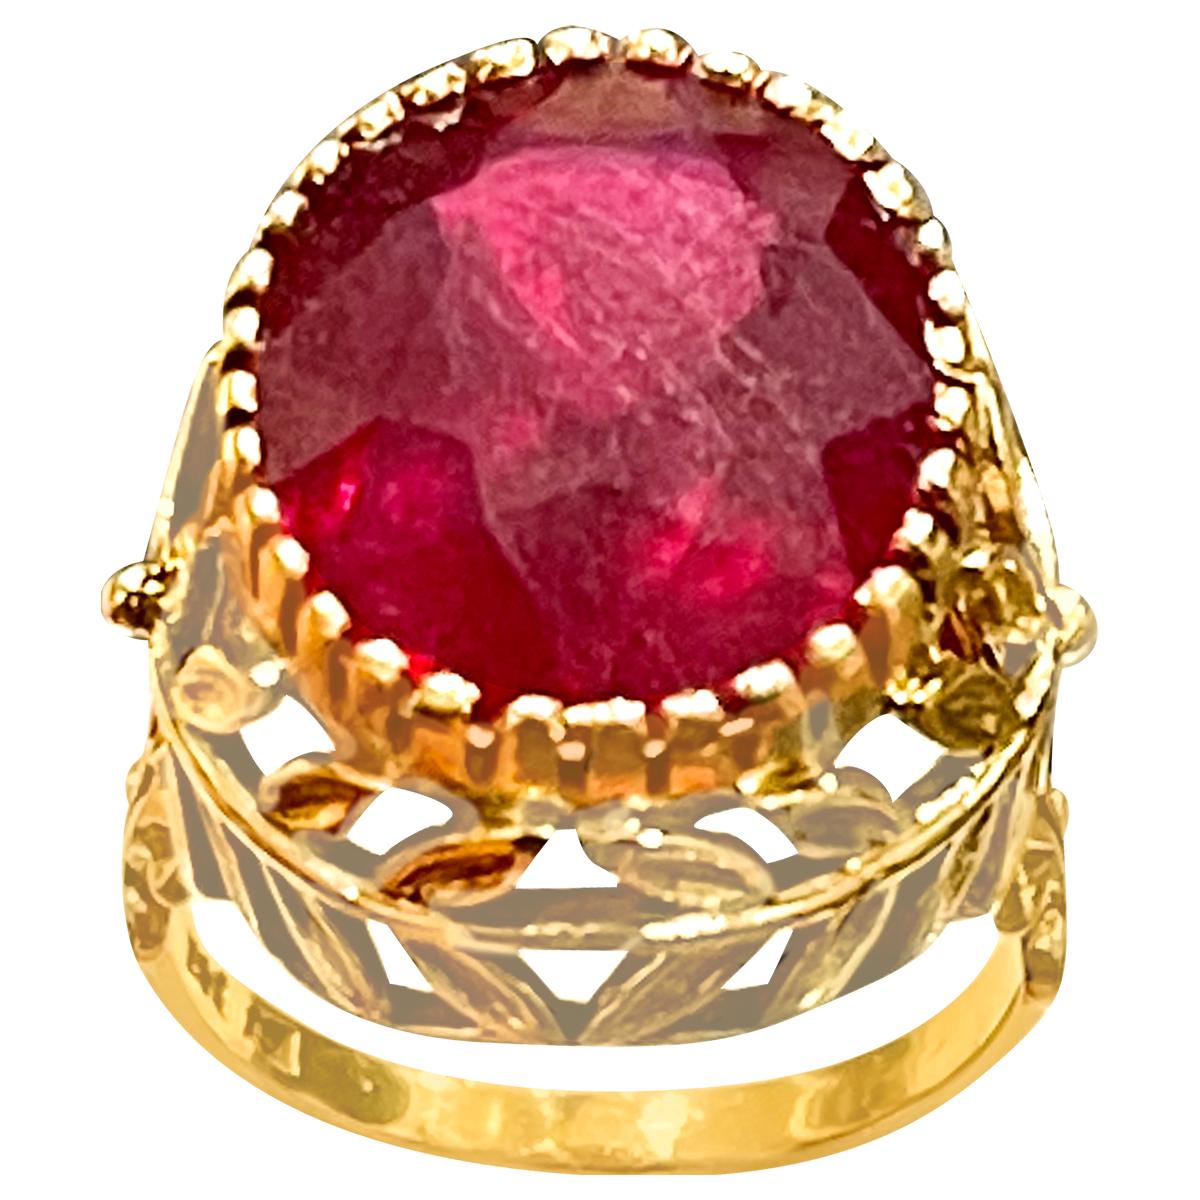 8.5 Carat Treated Oval Ruby 14 Karat Yellow Gold Cocktail Ring ,Vintage Size 6.5
Multiple  prong set
14 K Yellow Gold: 9.6  gram
Stamped 14K
Ring Size 6.5 ( can be altered for no charge )
Large approximately 8.5  carat oval shape ruby Treated 
Very